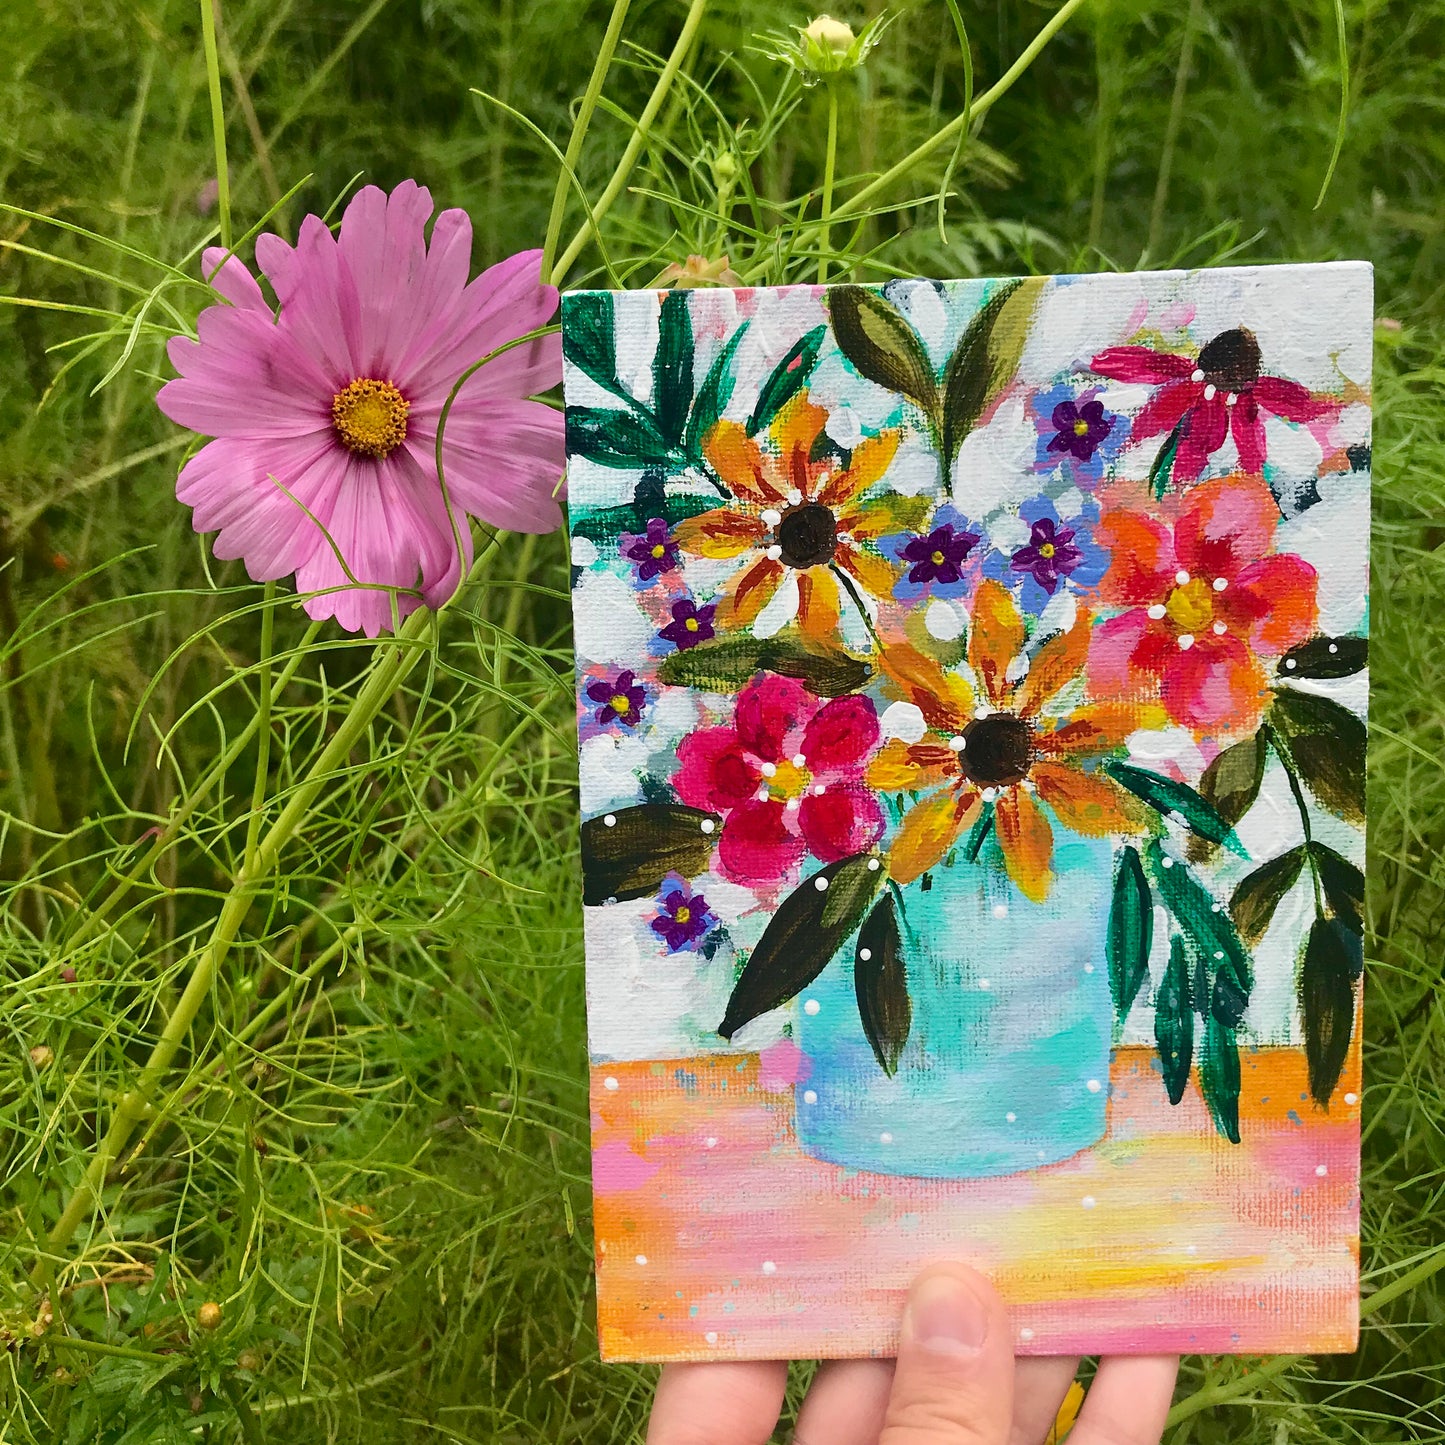 August Daily Painting Day 23 “Bouquet of Sunshine" 5x7 inch Floral Original - Bethany Joy Art